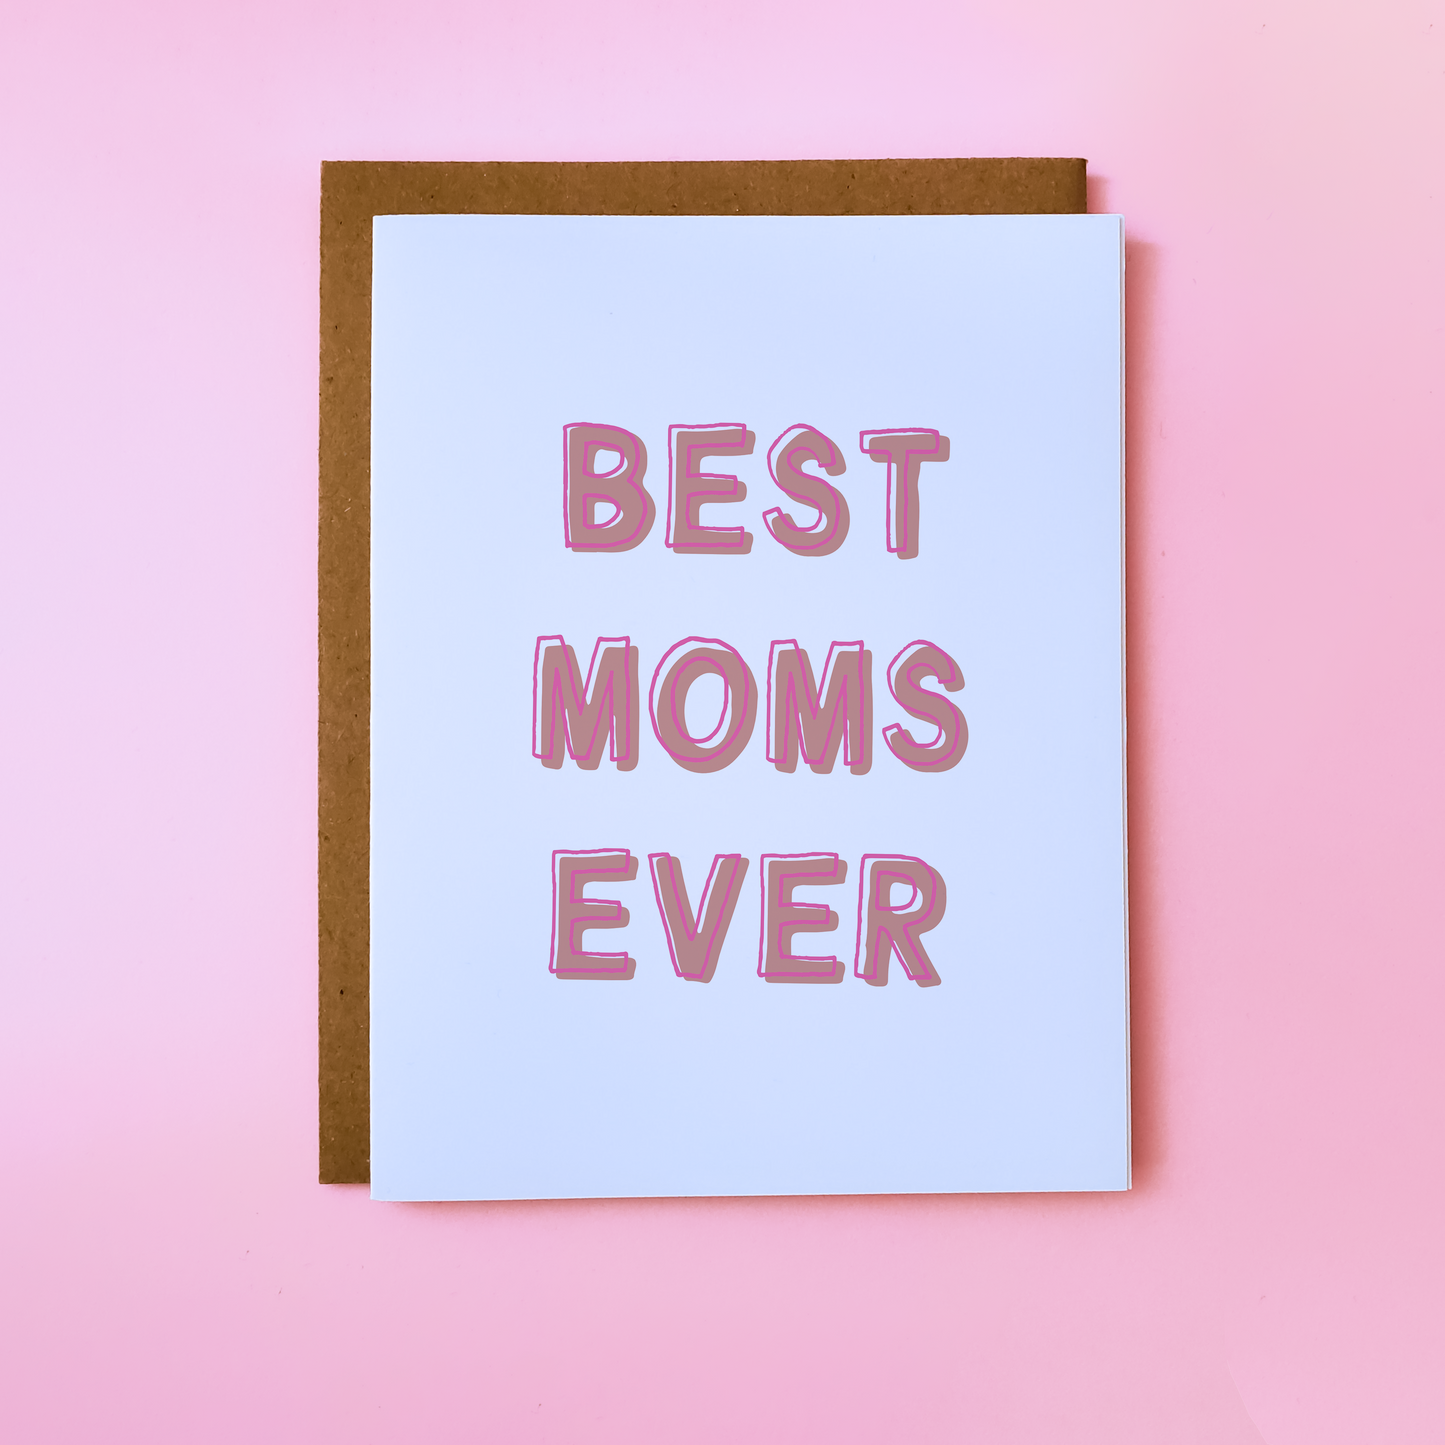 Image shows a LGBTQ Parent Card on pink background. Lesbian Mother's Day Card reads 'Best Moms Ever'.